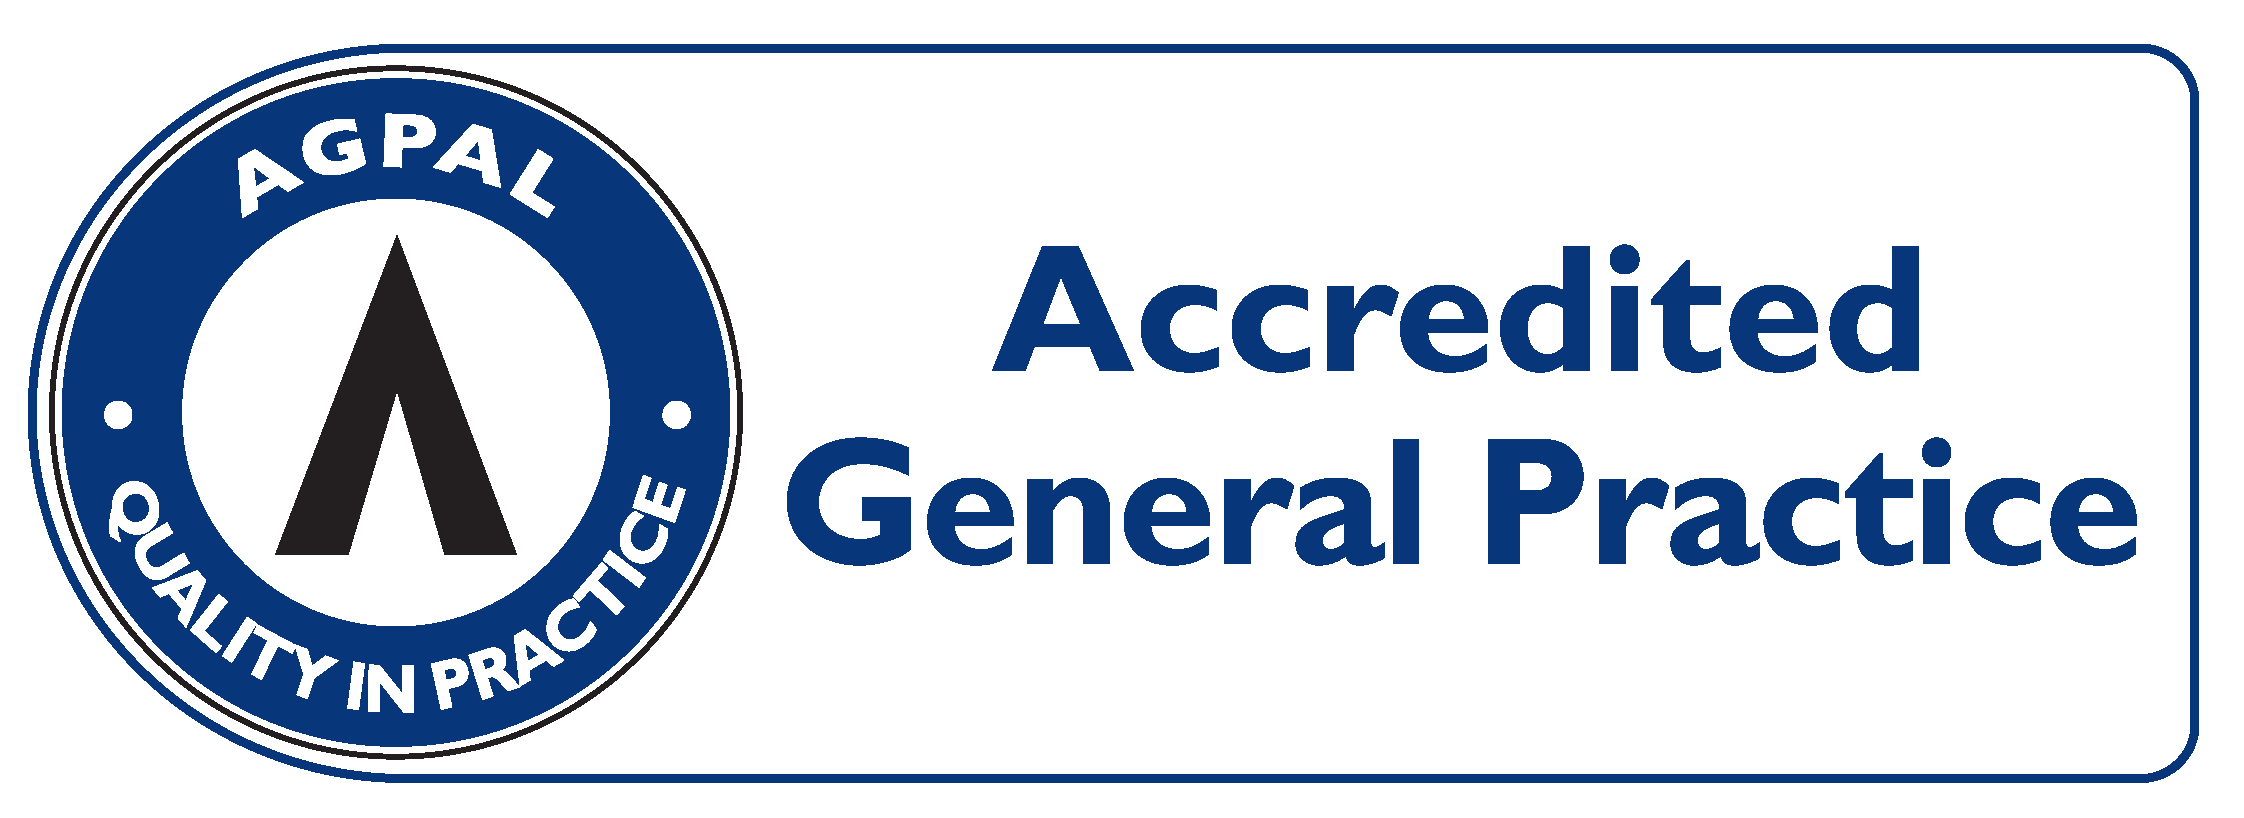 AGPAL-Accredited-Symbol-General-Practice